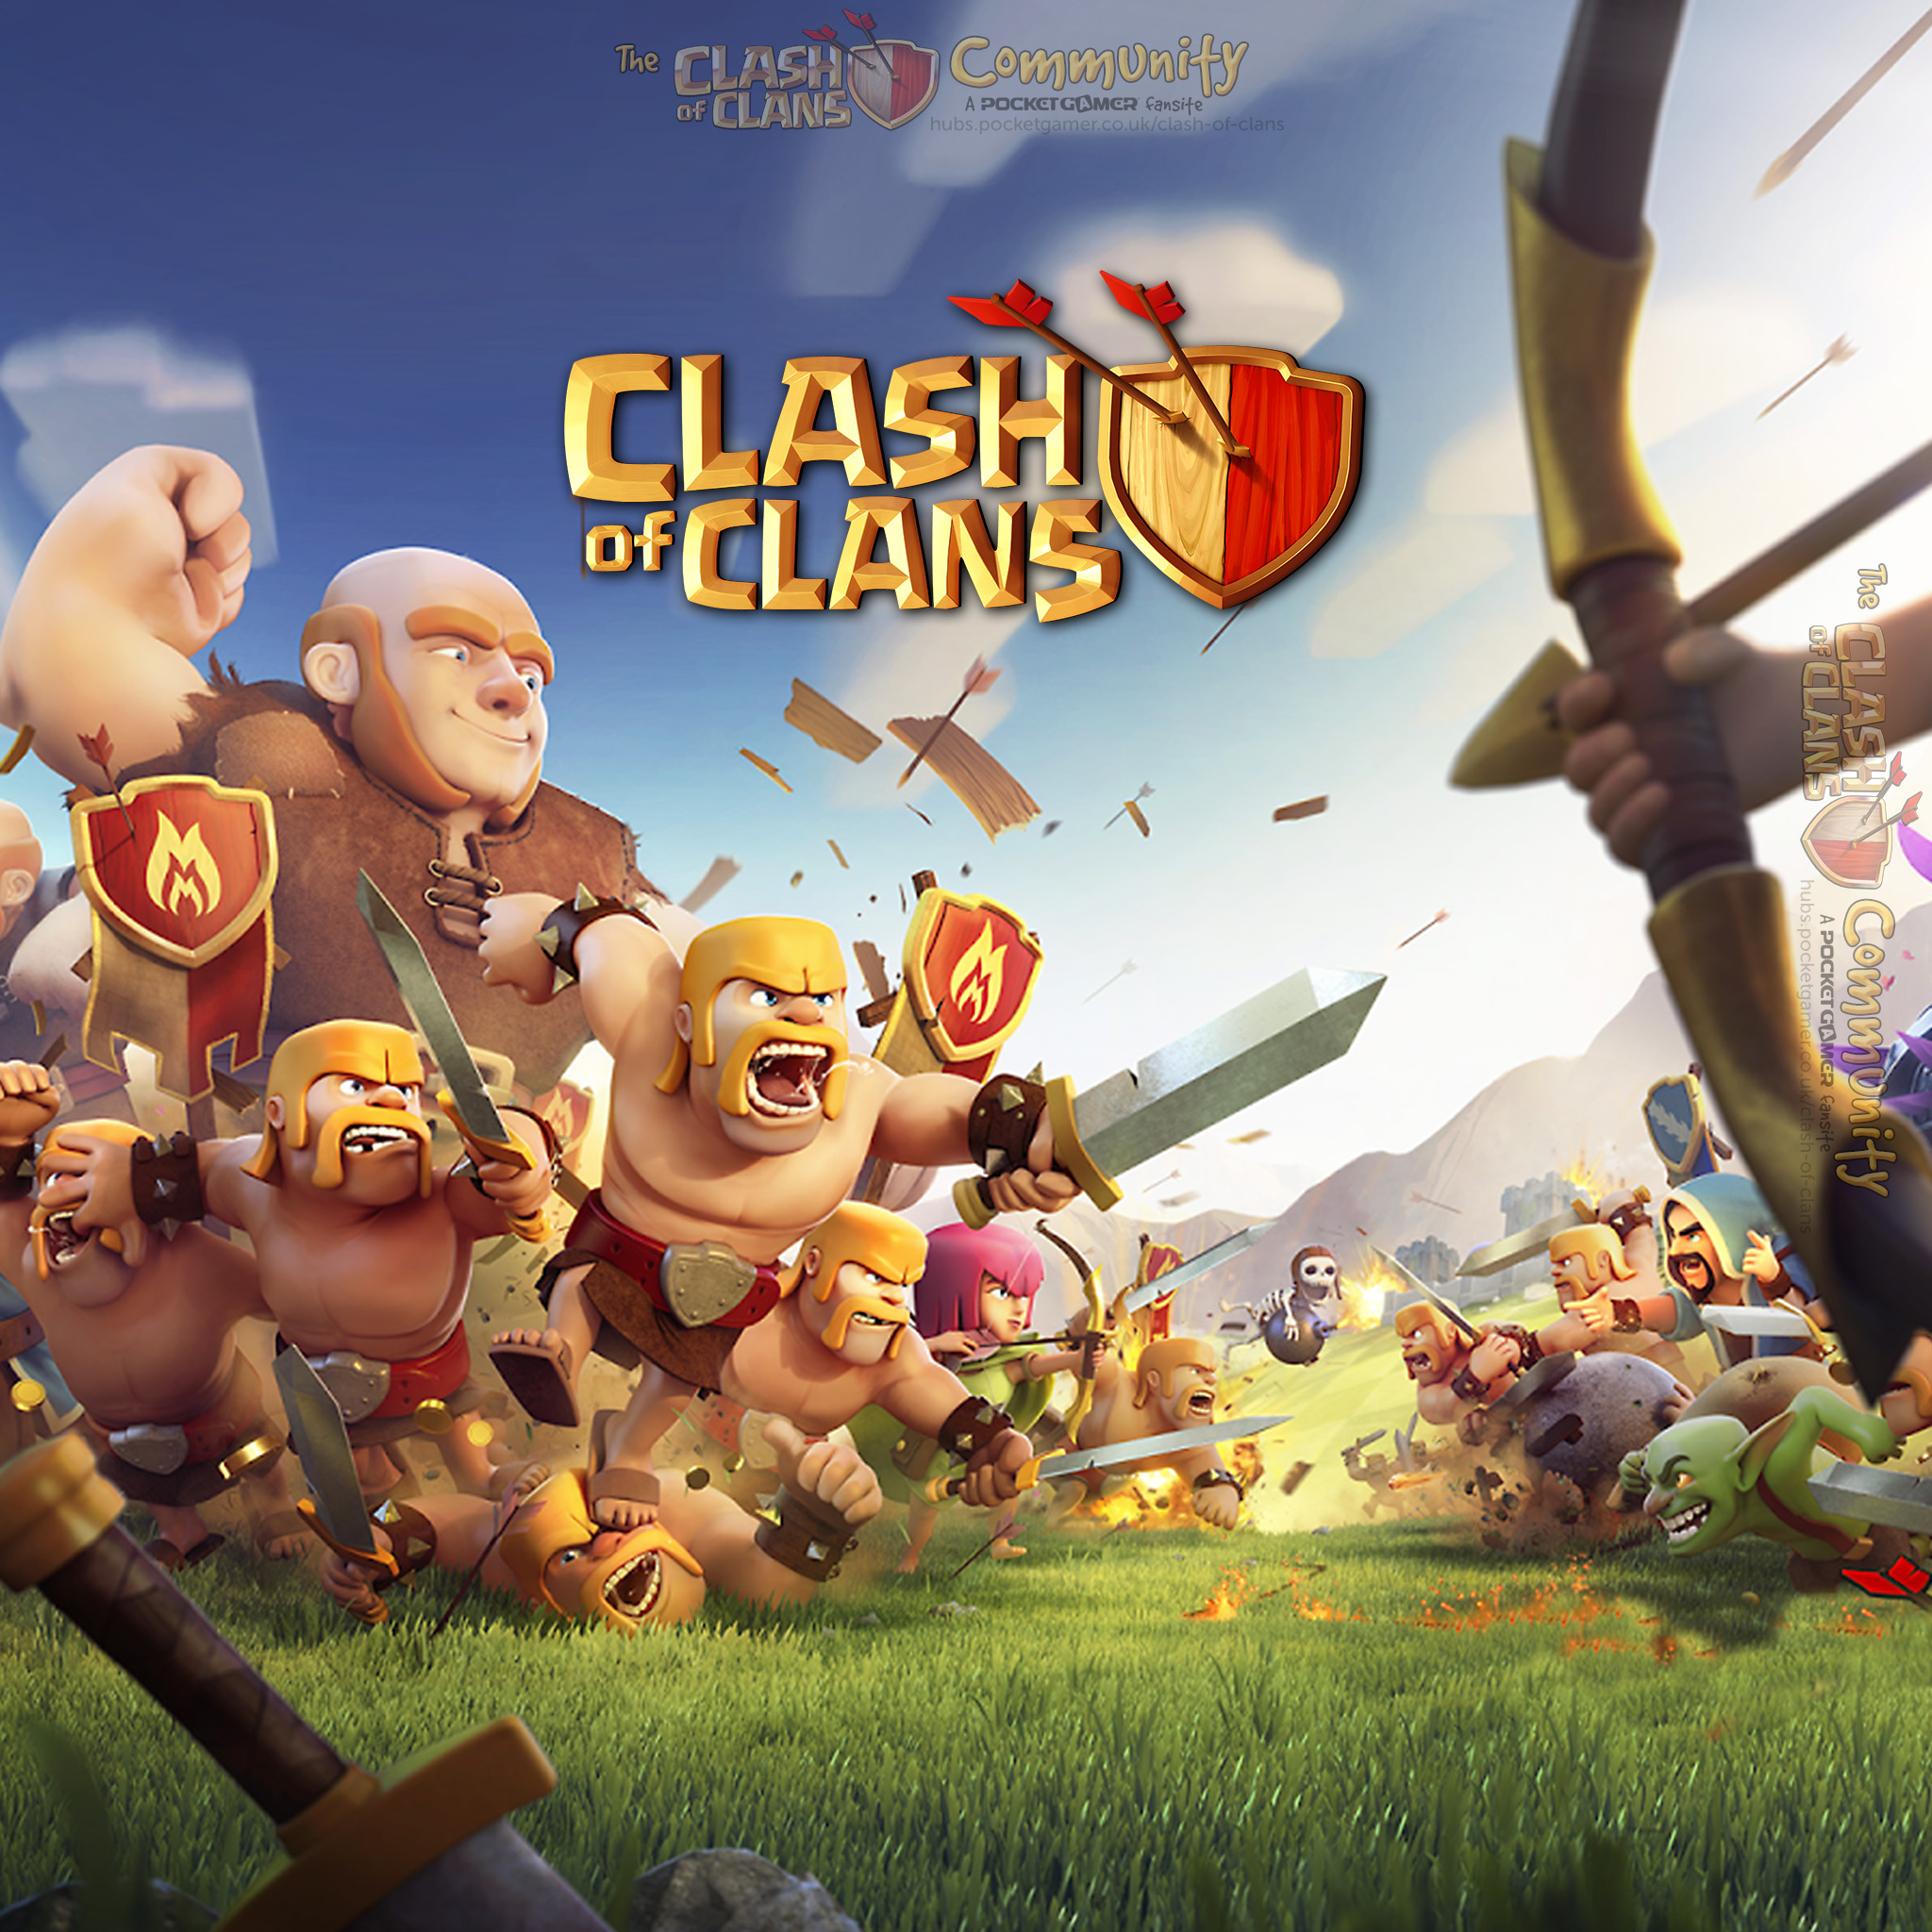 Wallpapers Clash Of Clans Pocket Gamer Game Hub